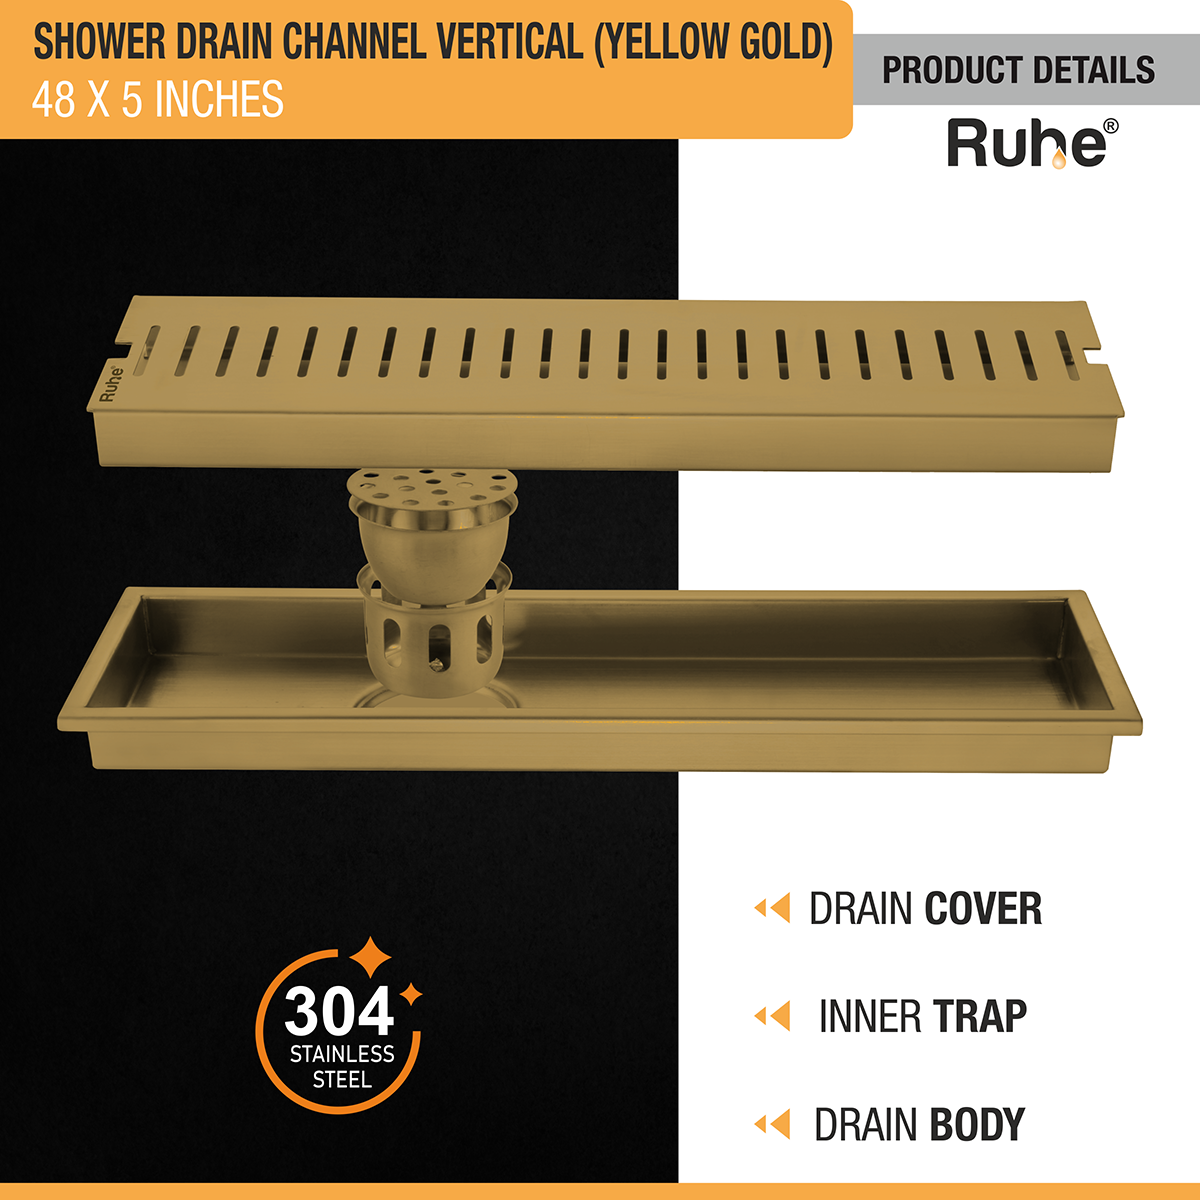 Vertical Shower Drain Channel (48 x 5 Inches) YELLOW GOLD product details